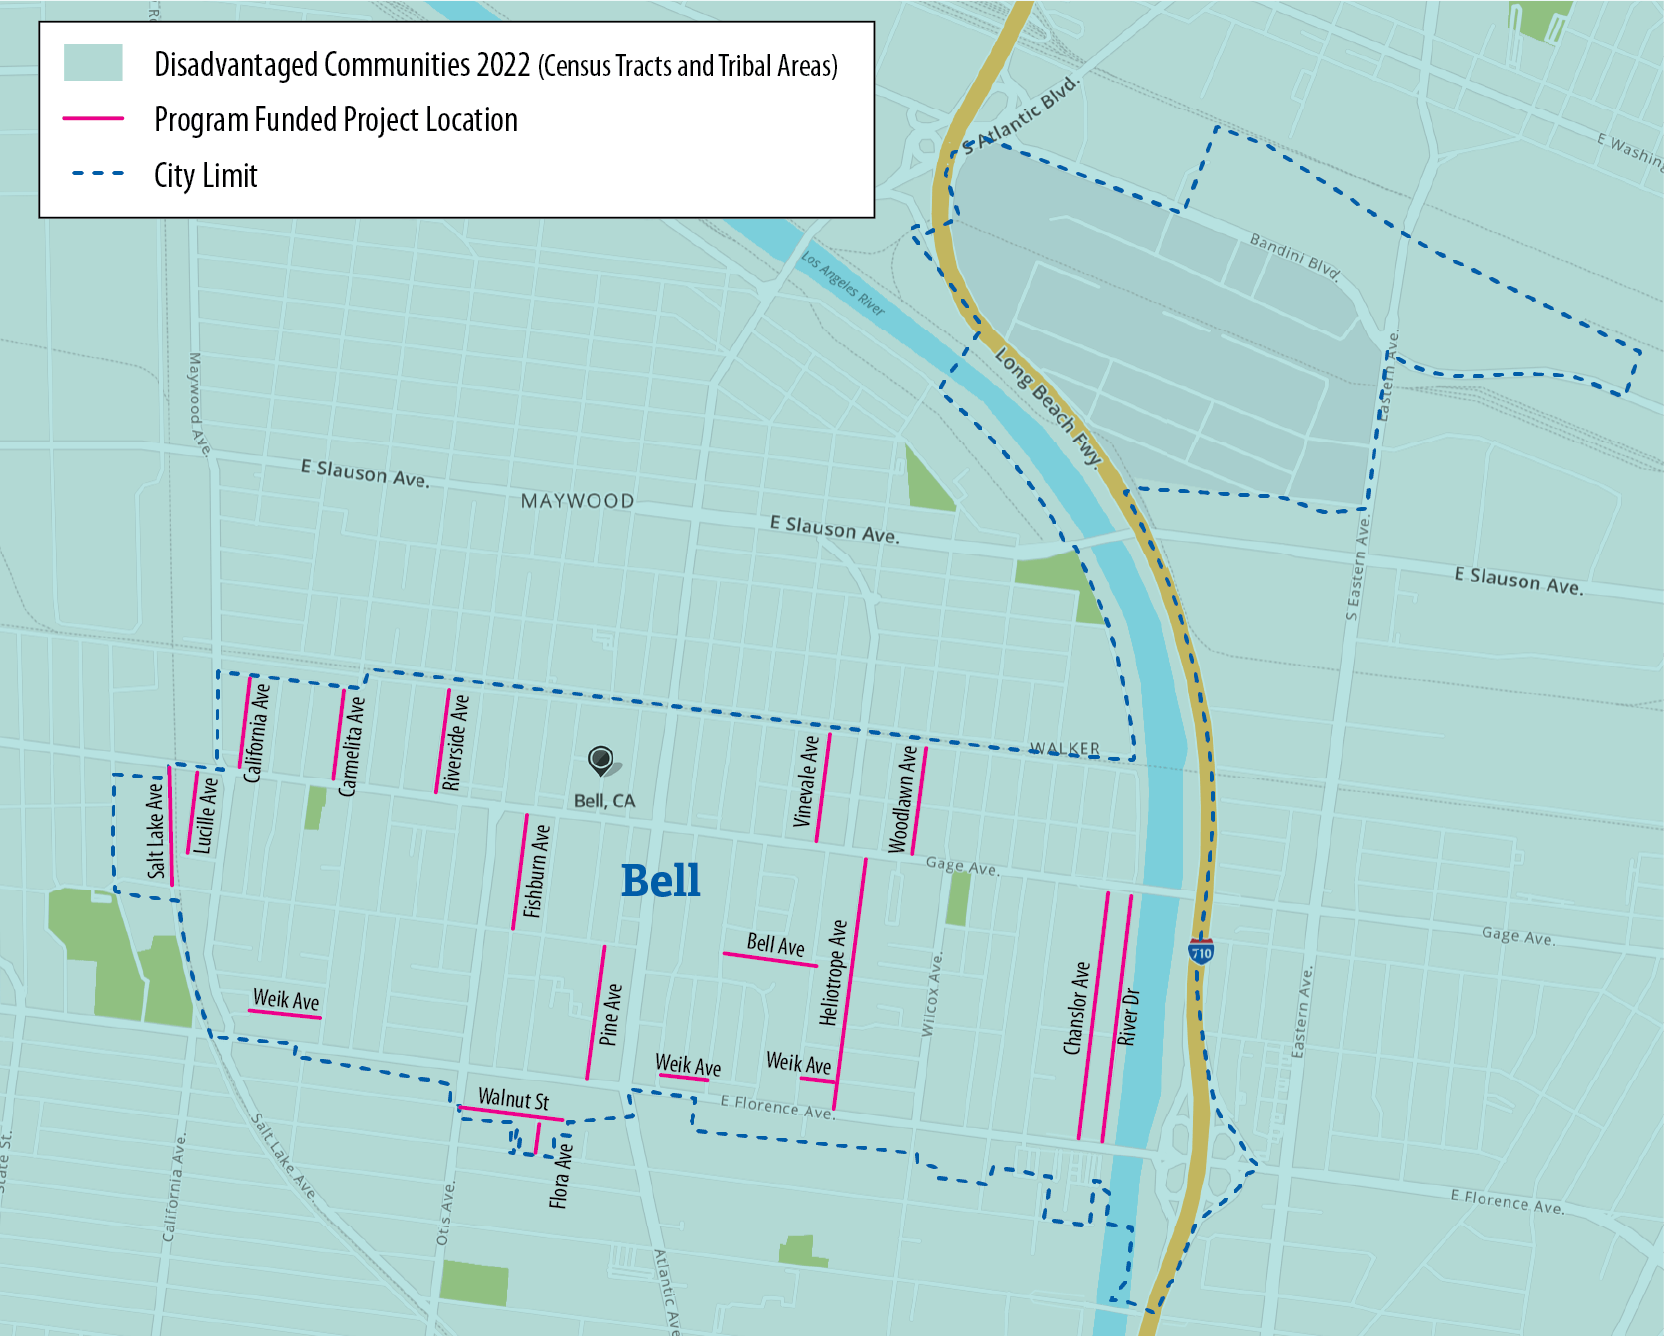 Figure A.2 shows map of Bell and the location of Local Streets and Roads Program funded projects in relation to the disadvantaged communities within the City.